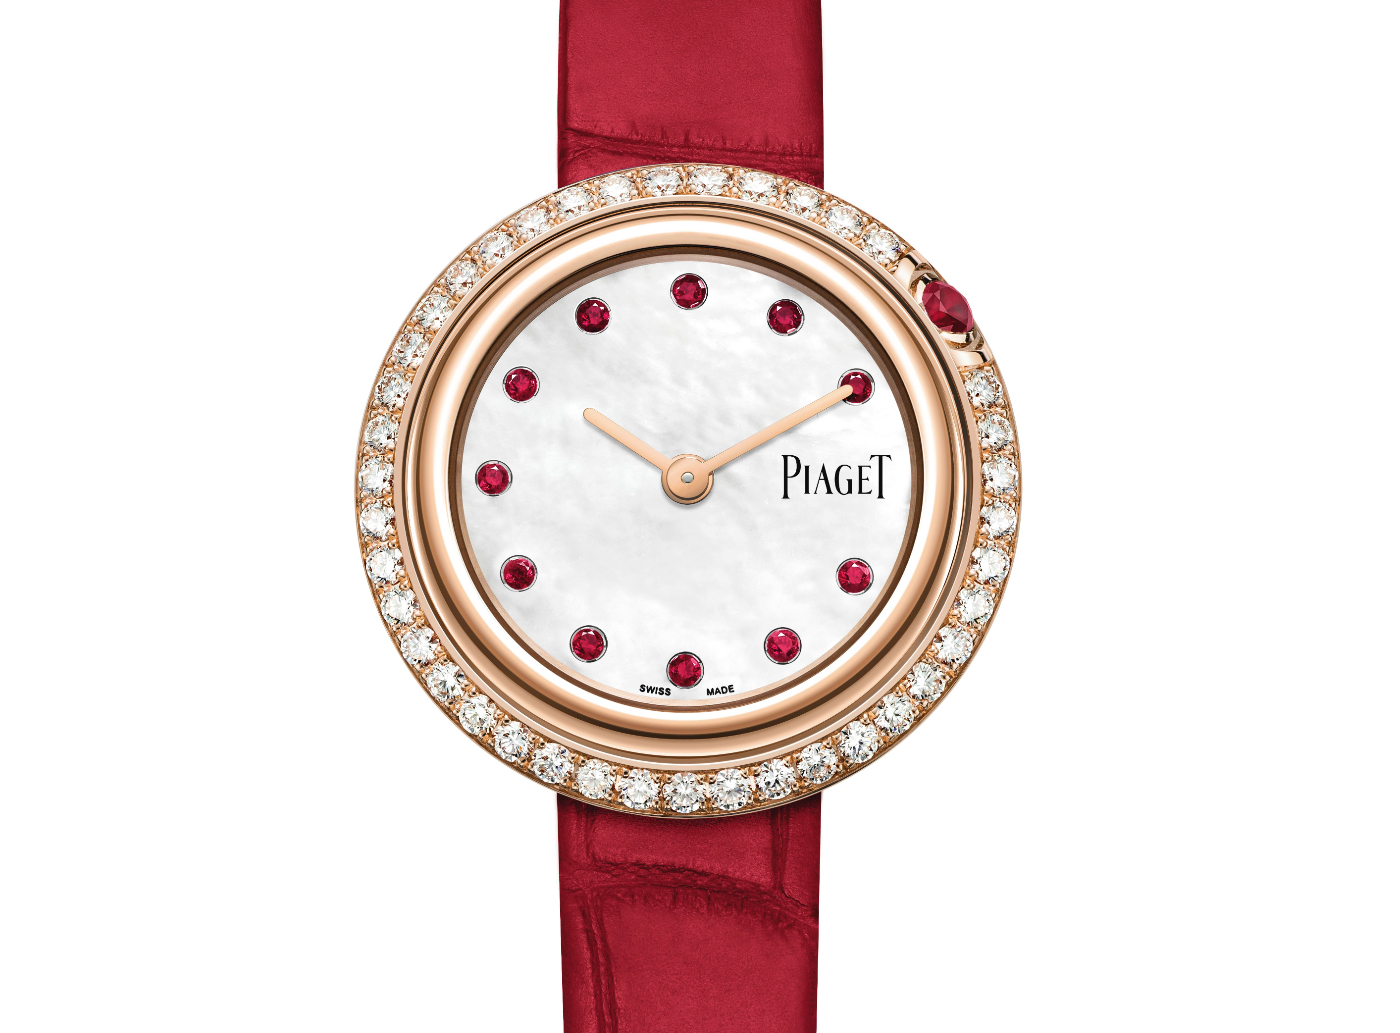 Piaget unveils its creations for the Chinese New Year 